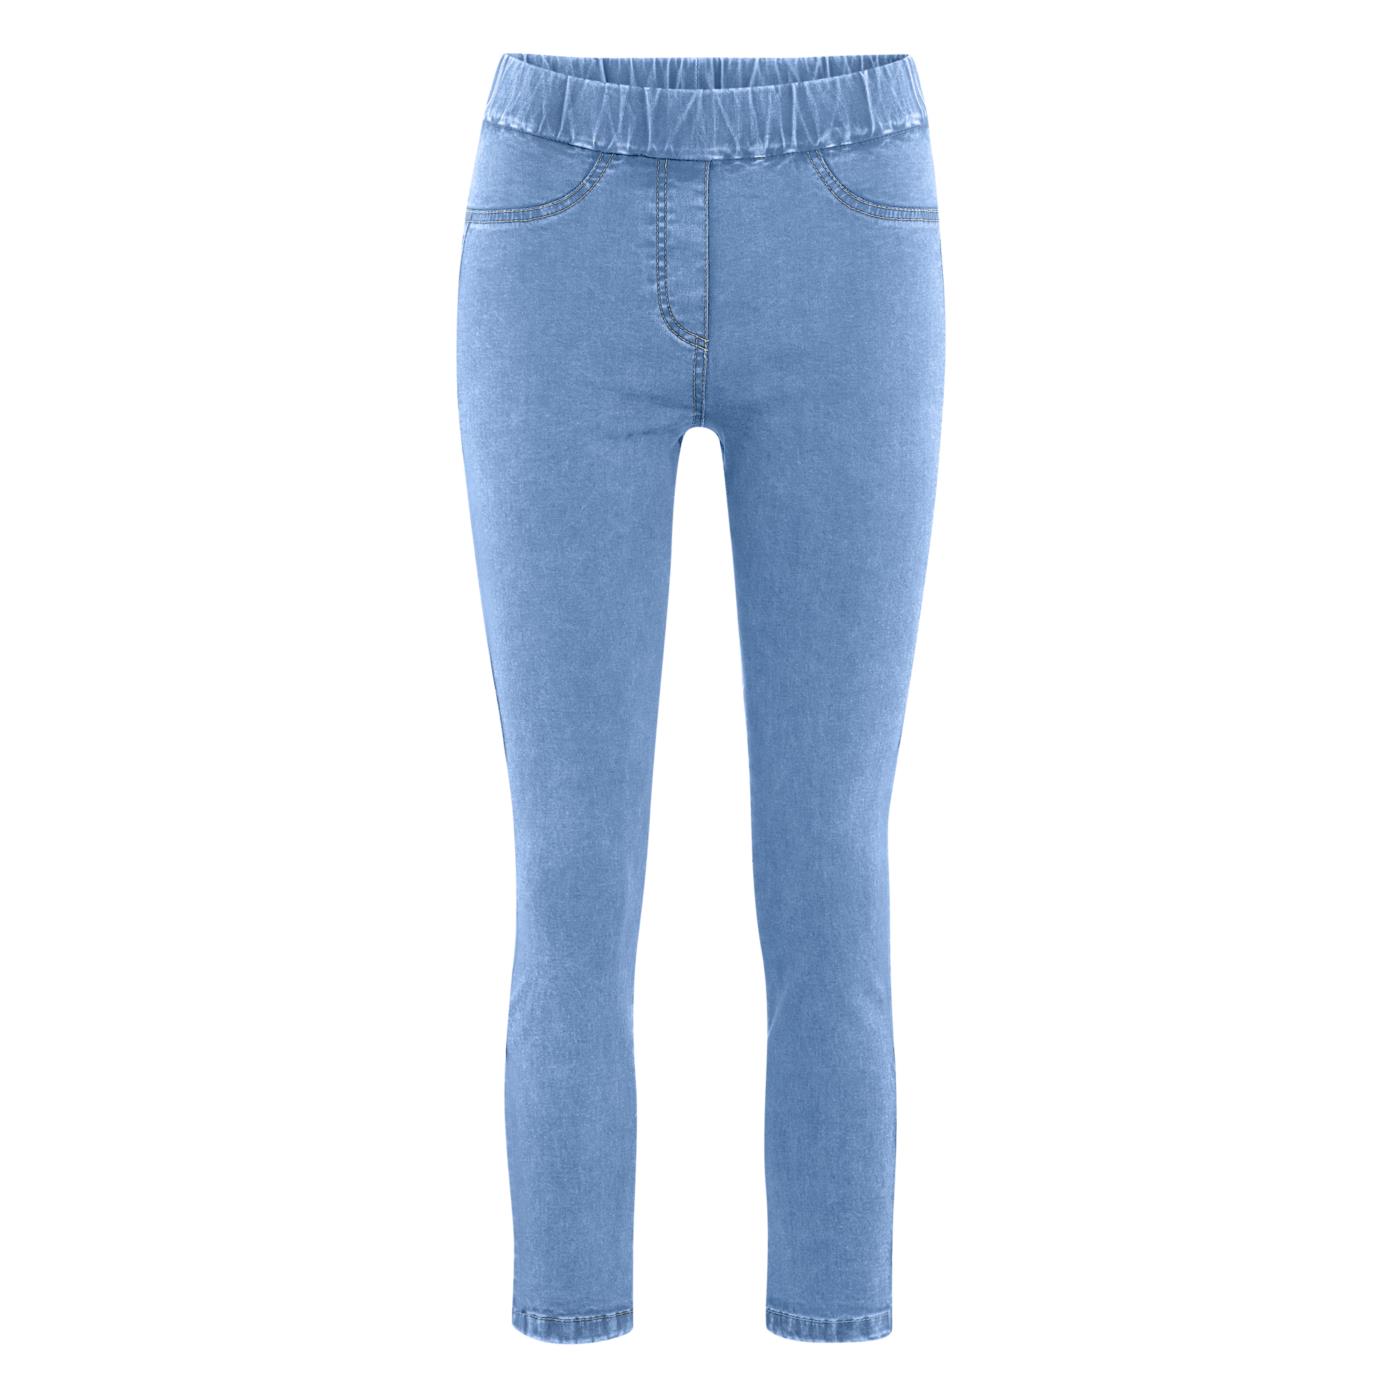 Treggings donna Jeans Style Bleached in cotone biologico_61561